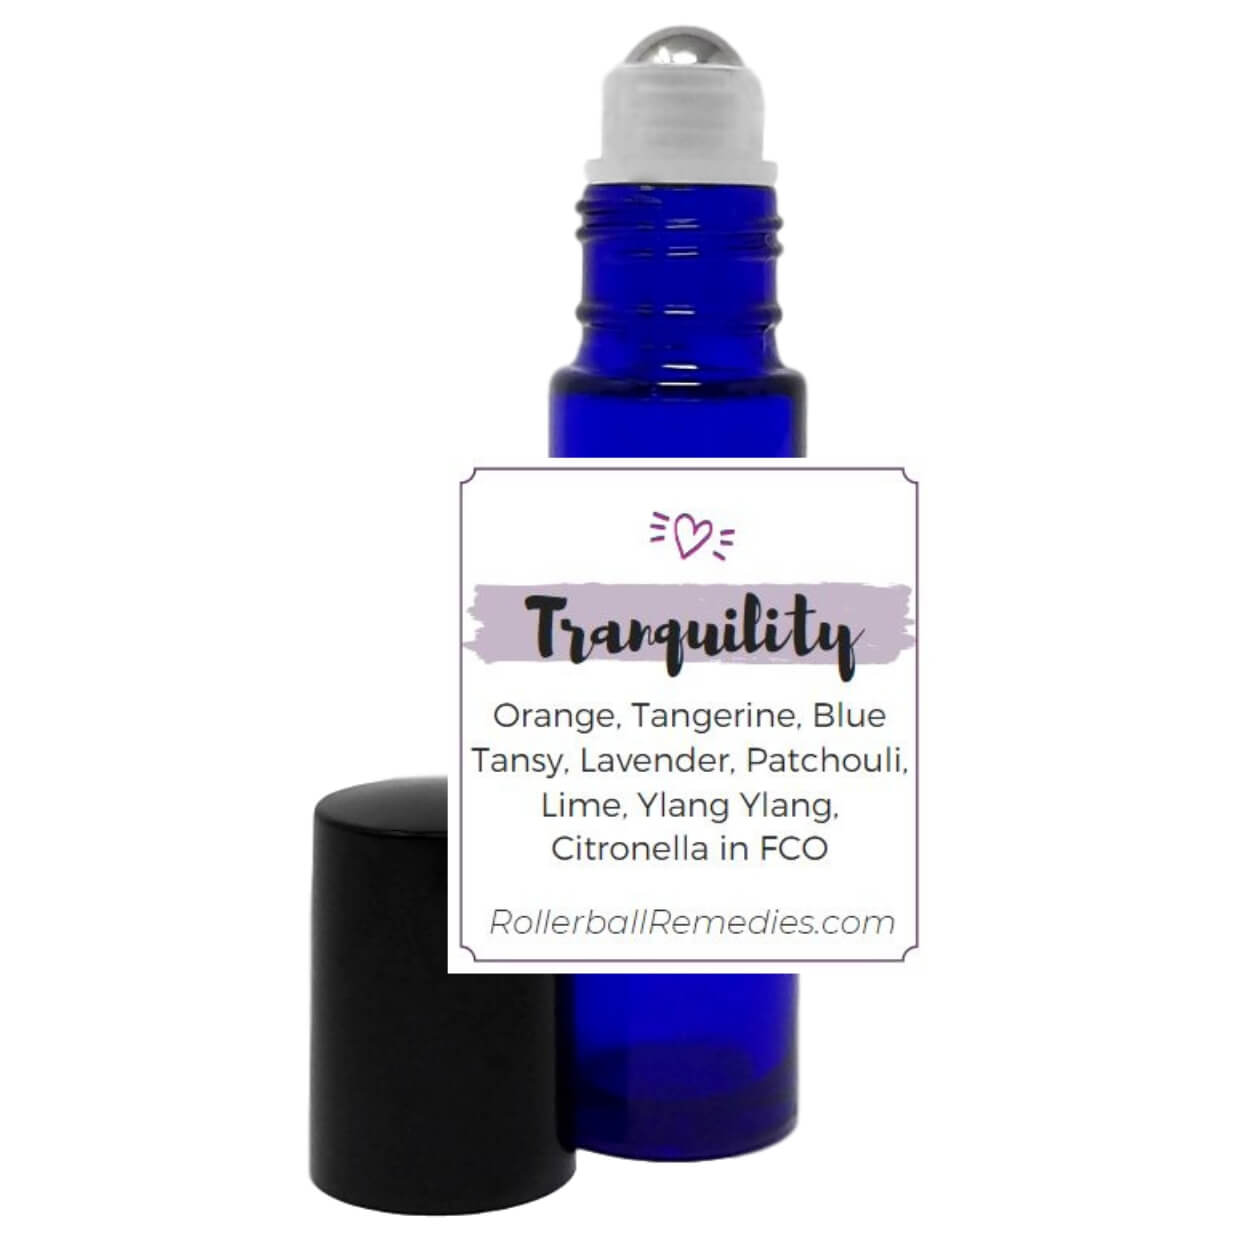 Tranquility Essential Oil Roller Blend - 10 ml Roll On Bottle with Orange, Tangerine, Patchouli, Lime, Blue Tansy, Ylang Ylang, Lavender, Citronella